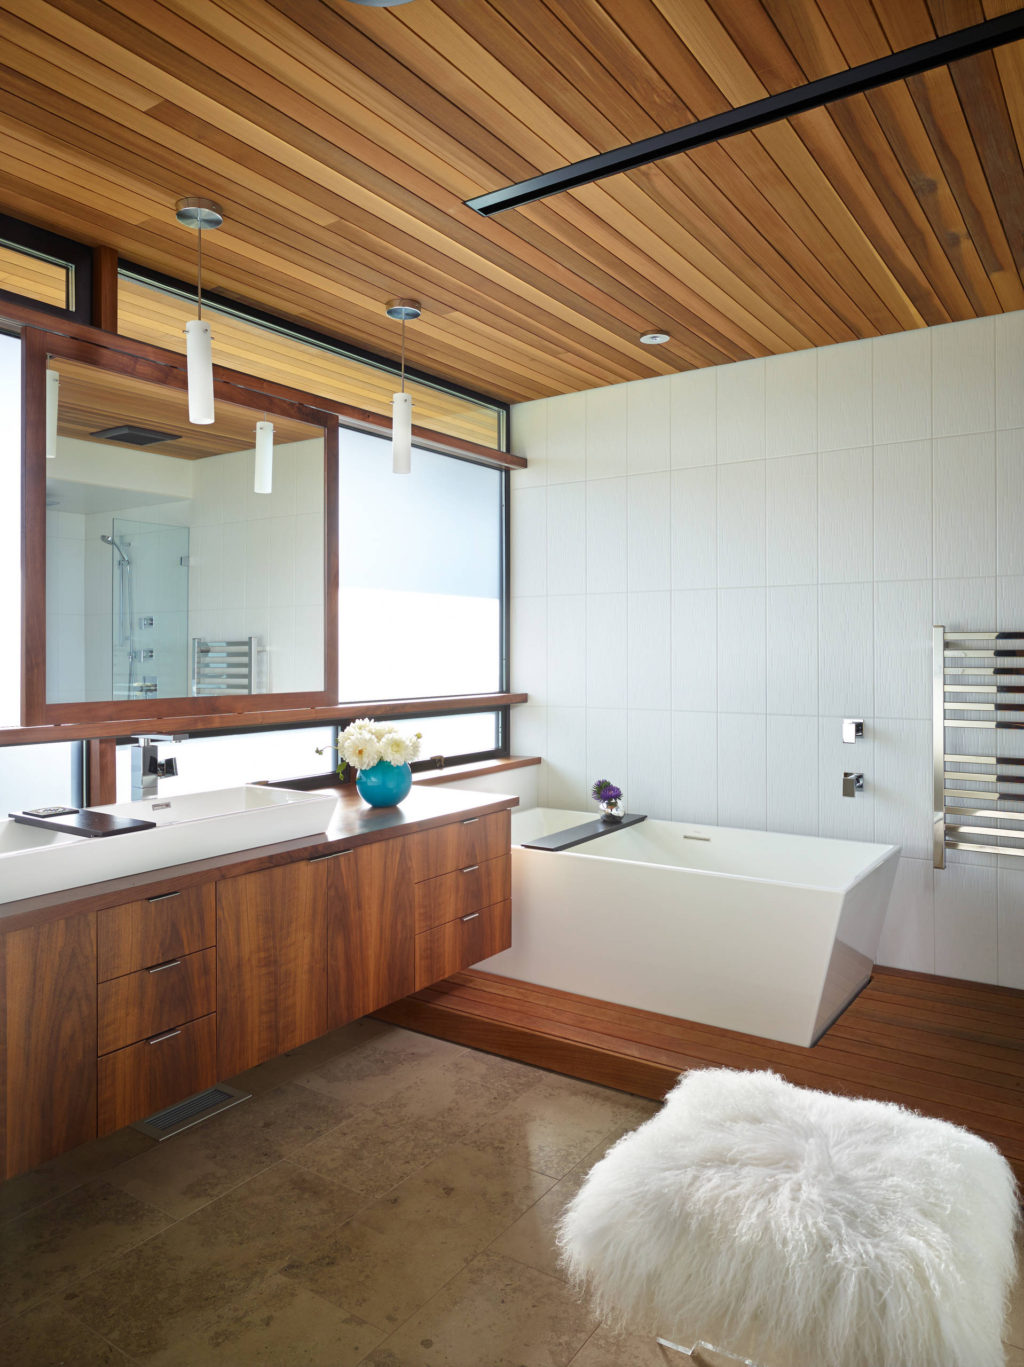 Wood on the Ceiling. Top 10 Outdated Bathroom Design Trends to Avoid - 22